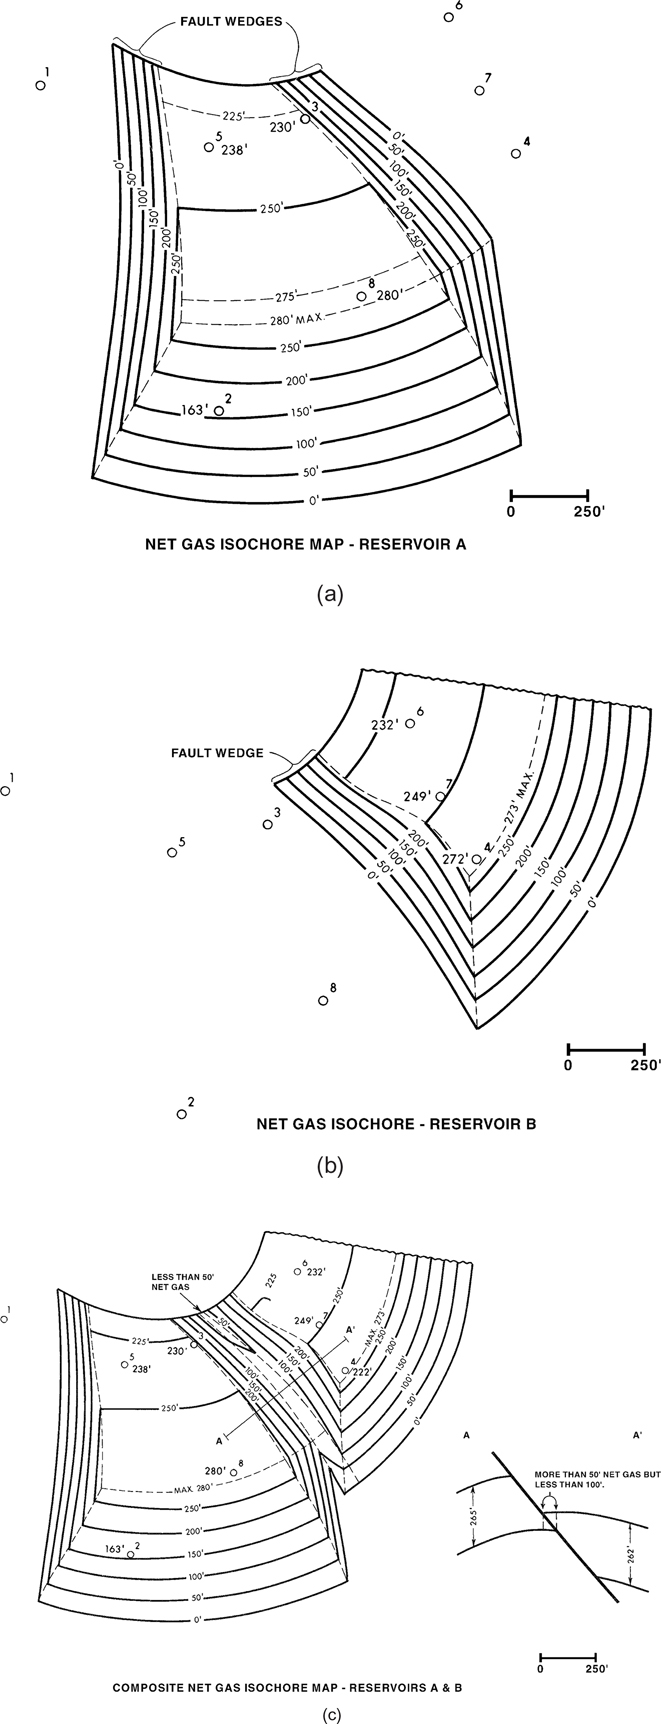 A figure showing the composite net gas isochore map for two reservoirs.